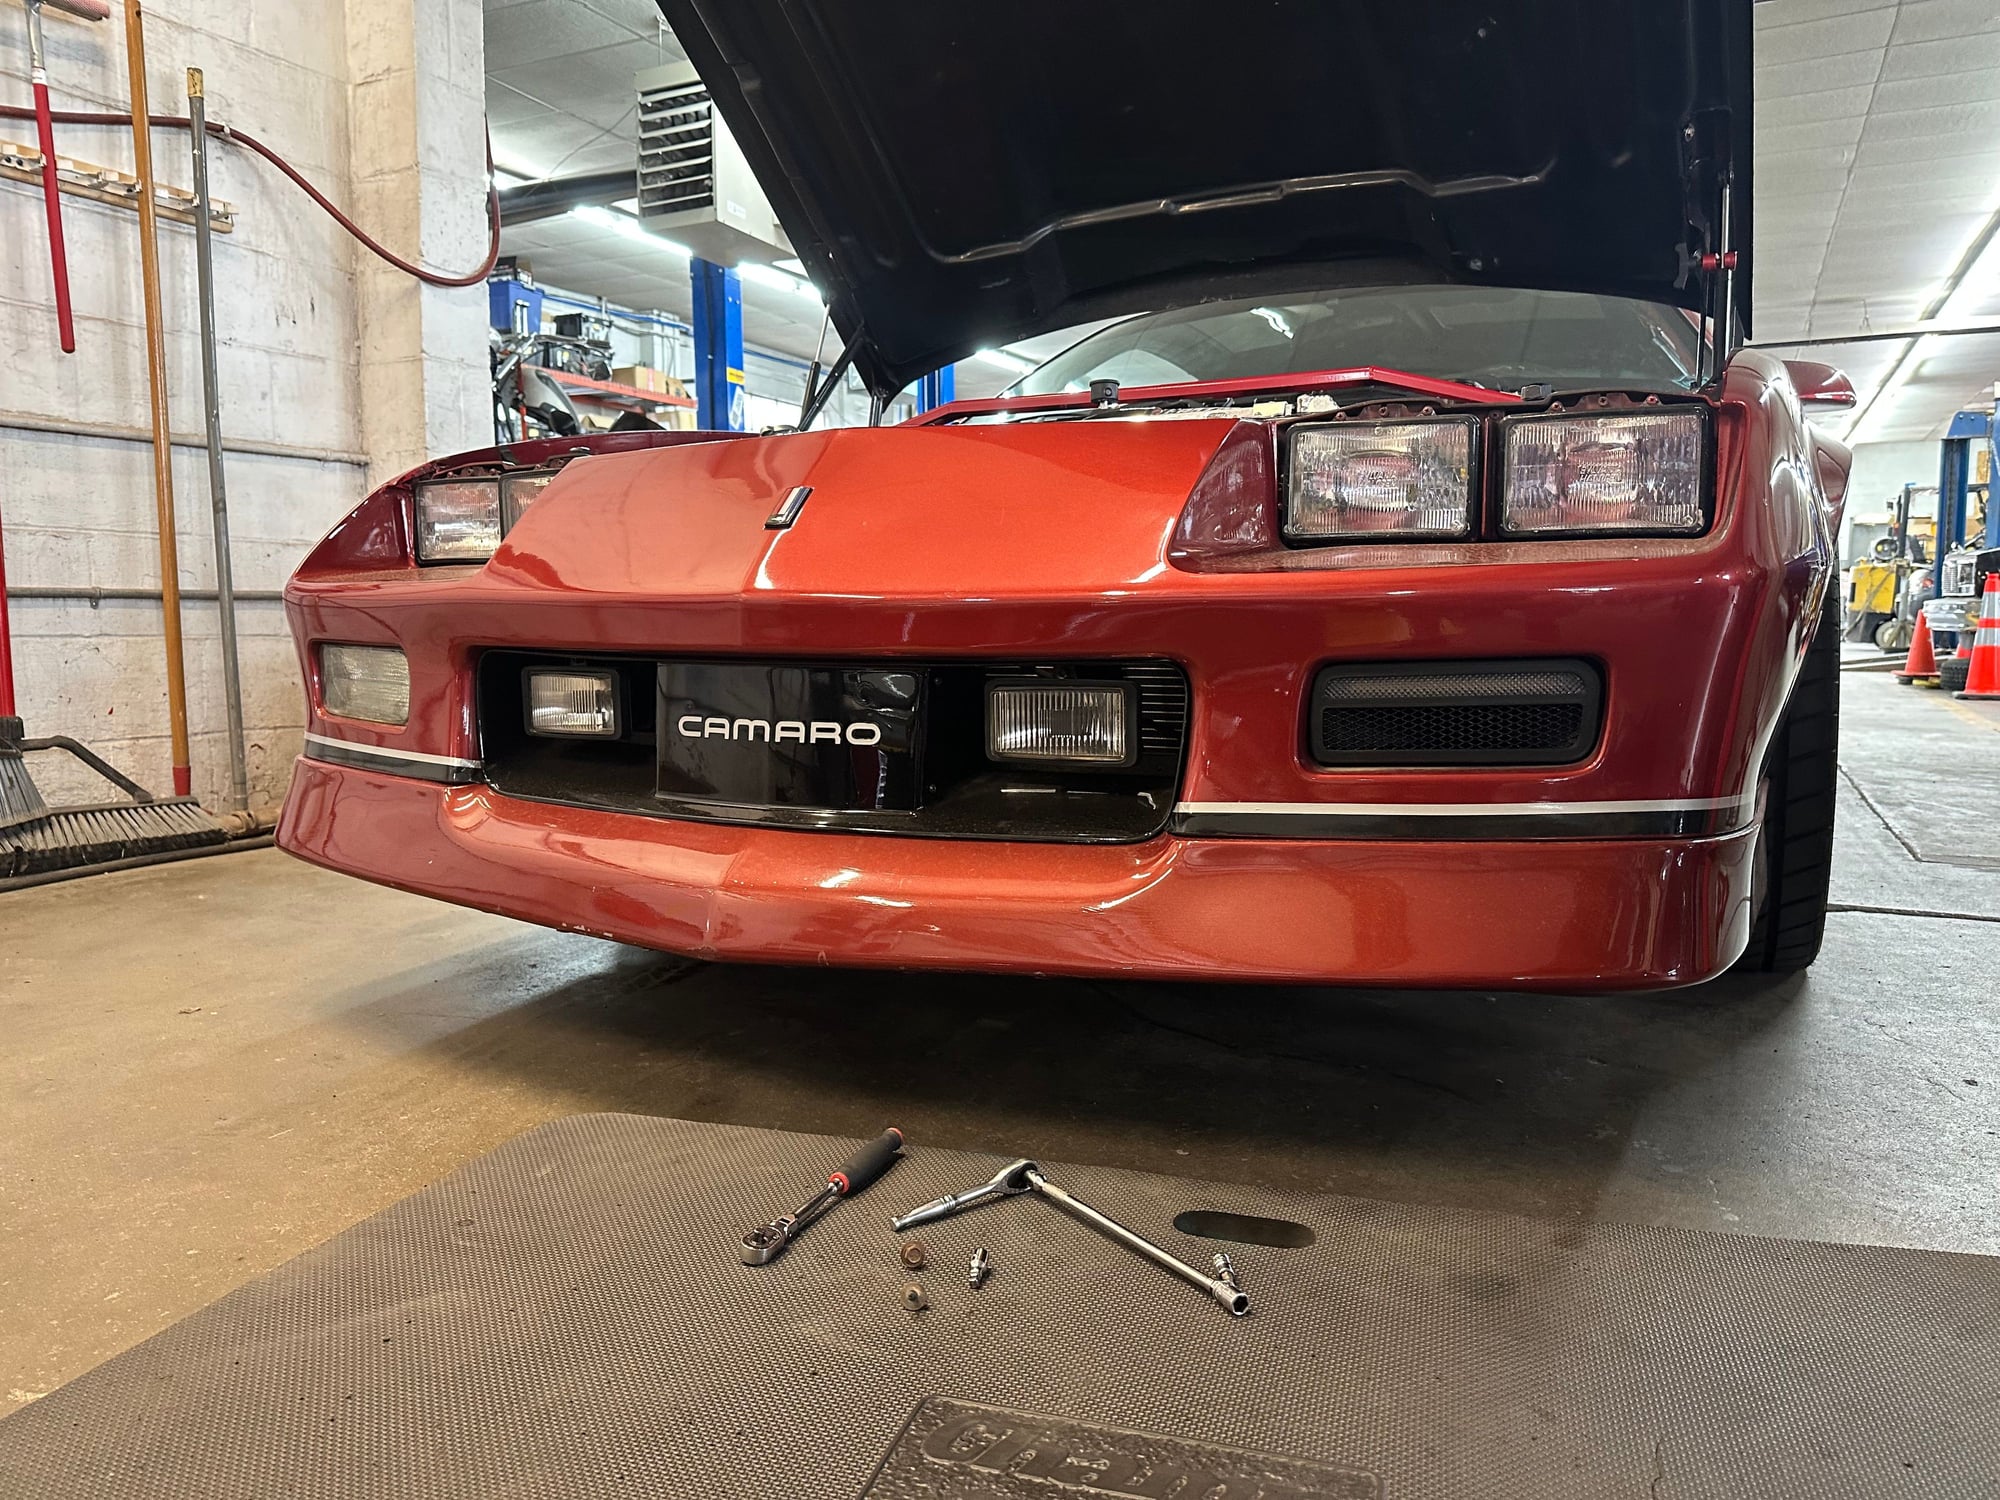 1986 Chevrolet Camaro - LS3/T56 swapped may trade - Used - VIN 1g1fp87f5gn121773 - 107,000 Miles - 8 cyl - 2WD - Manual - Coupe - Other - Wheelersburg, OH 45694, United States